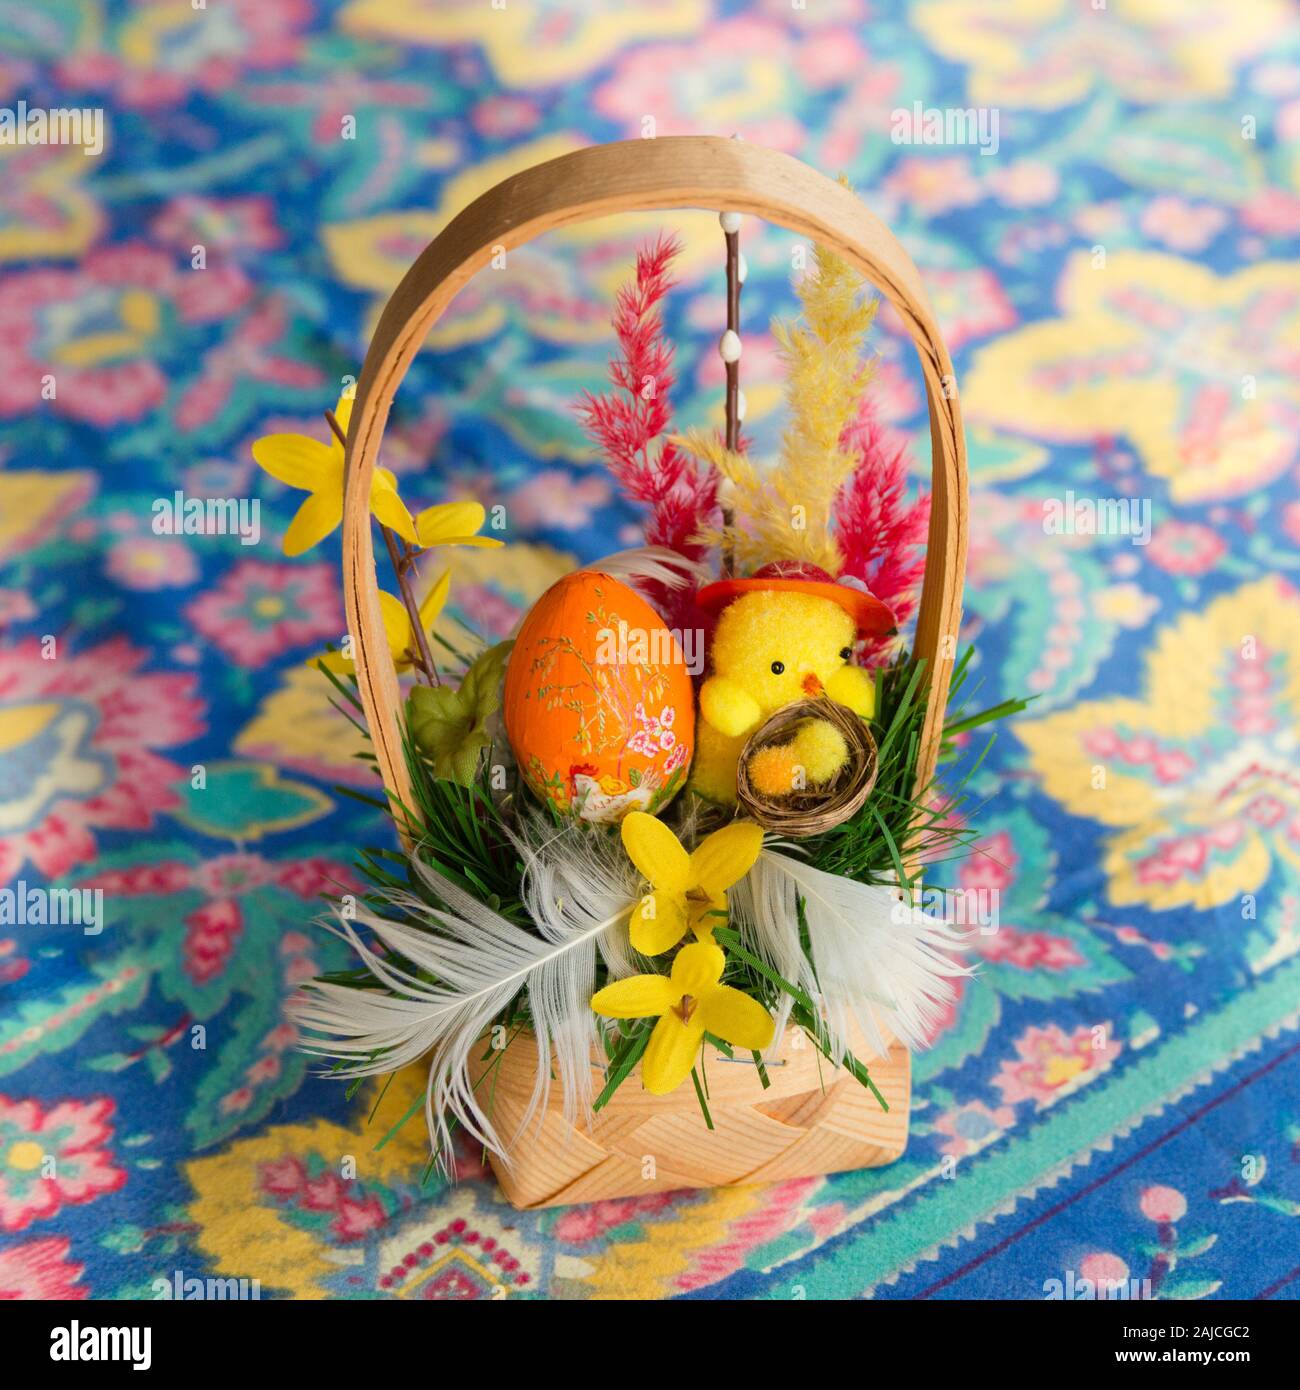 https://c8.alamy.com/comp/2AJCGC2/traditional-polish-easter-basket-with-painted-egg-and-decorations-2AJCGC2.jpg